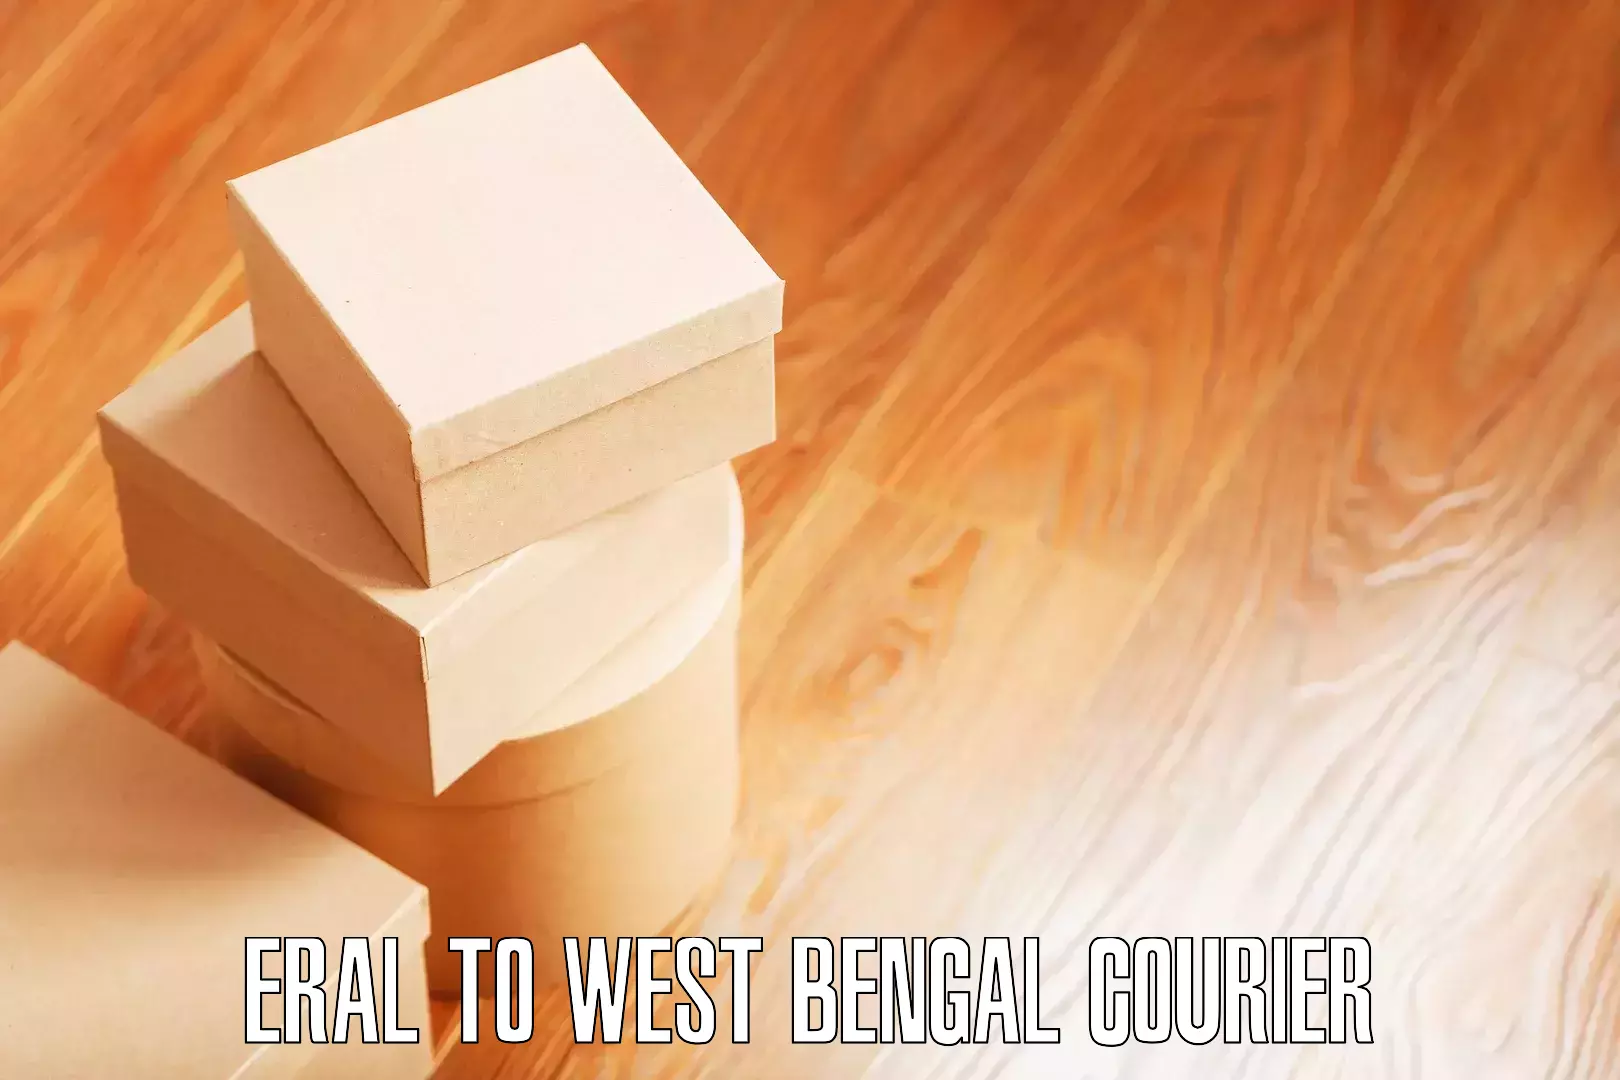 Reliable goods transport Eral to West Bengal